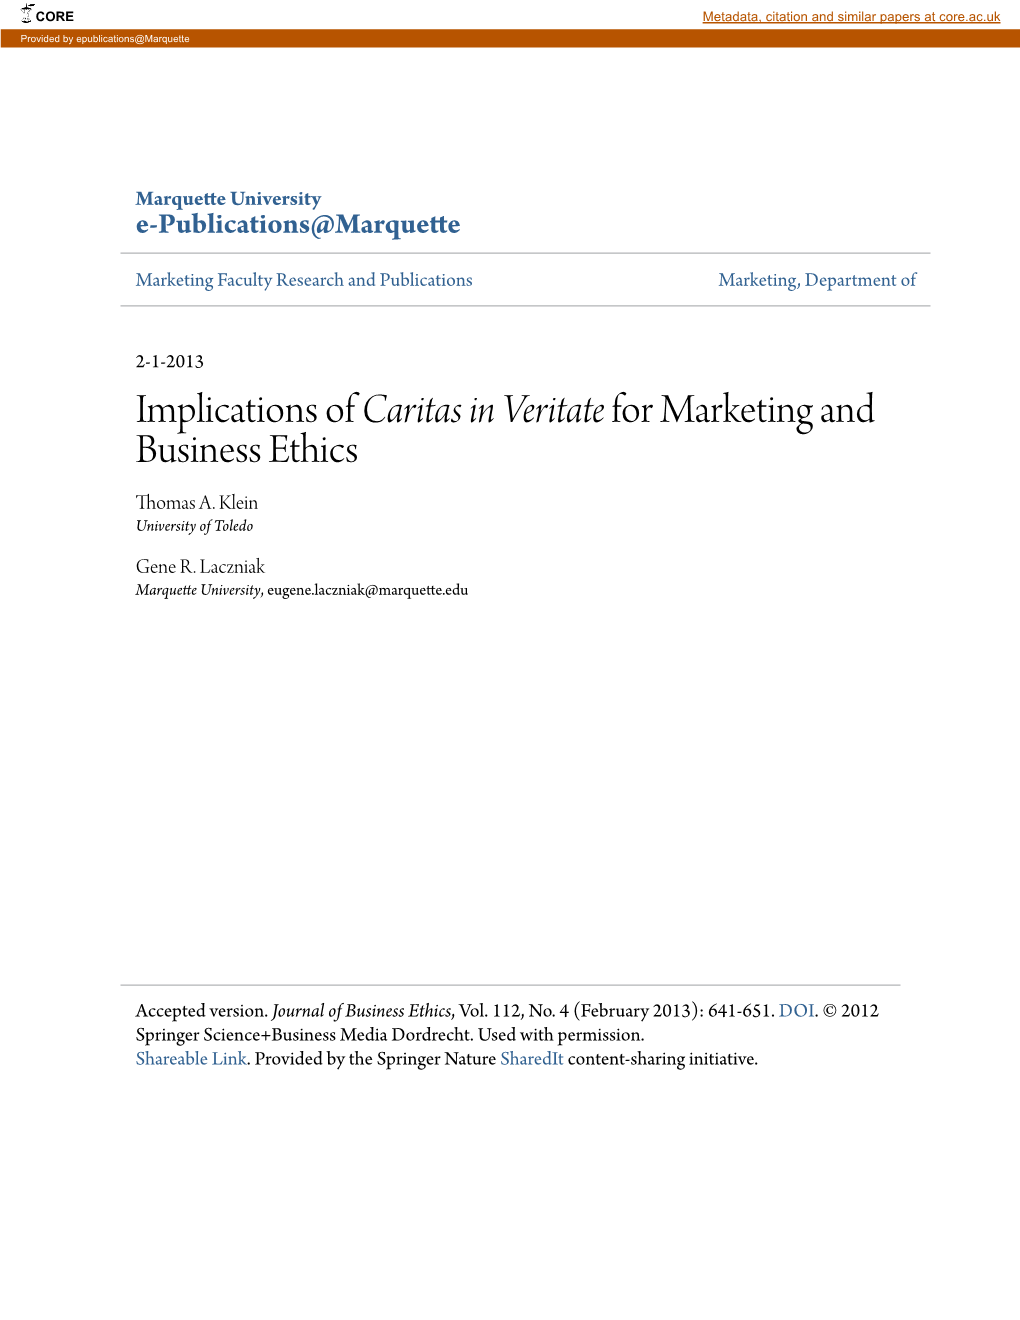 Caritas in Veritate&lt;/Em&gt; for Marketing and Business Ethics